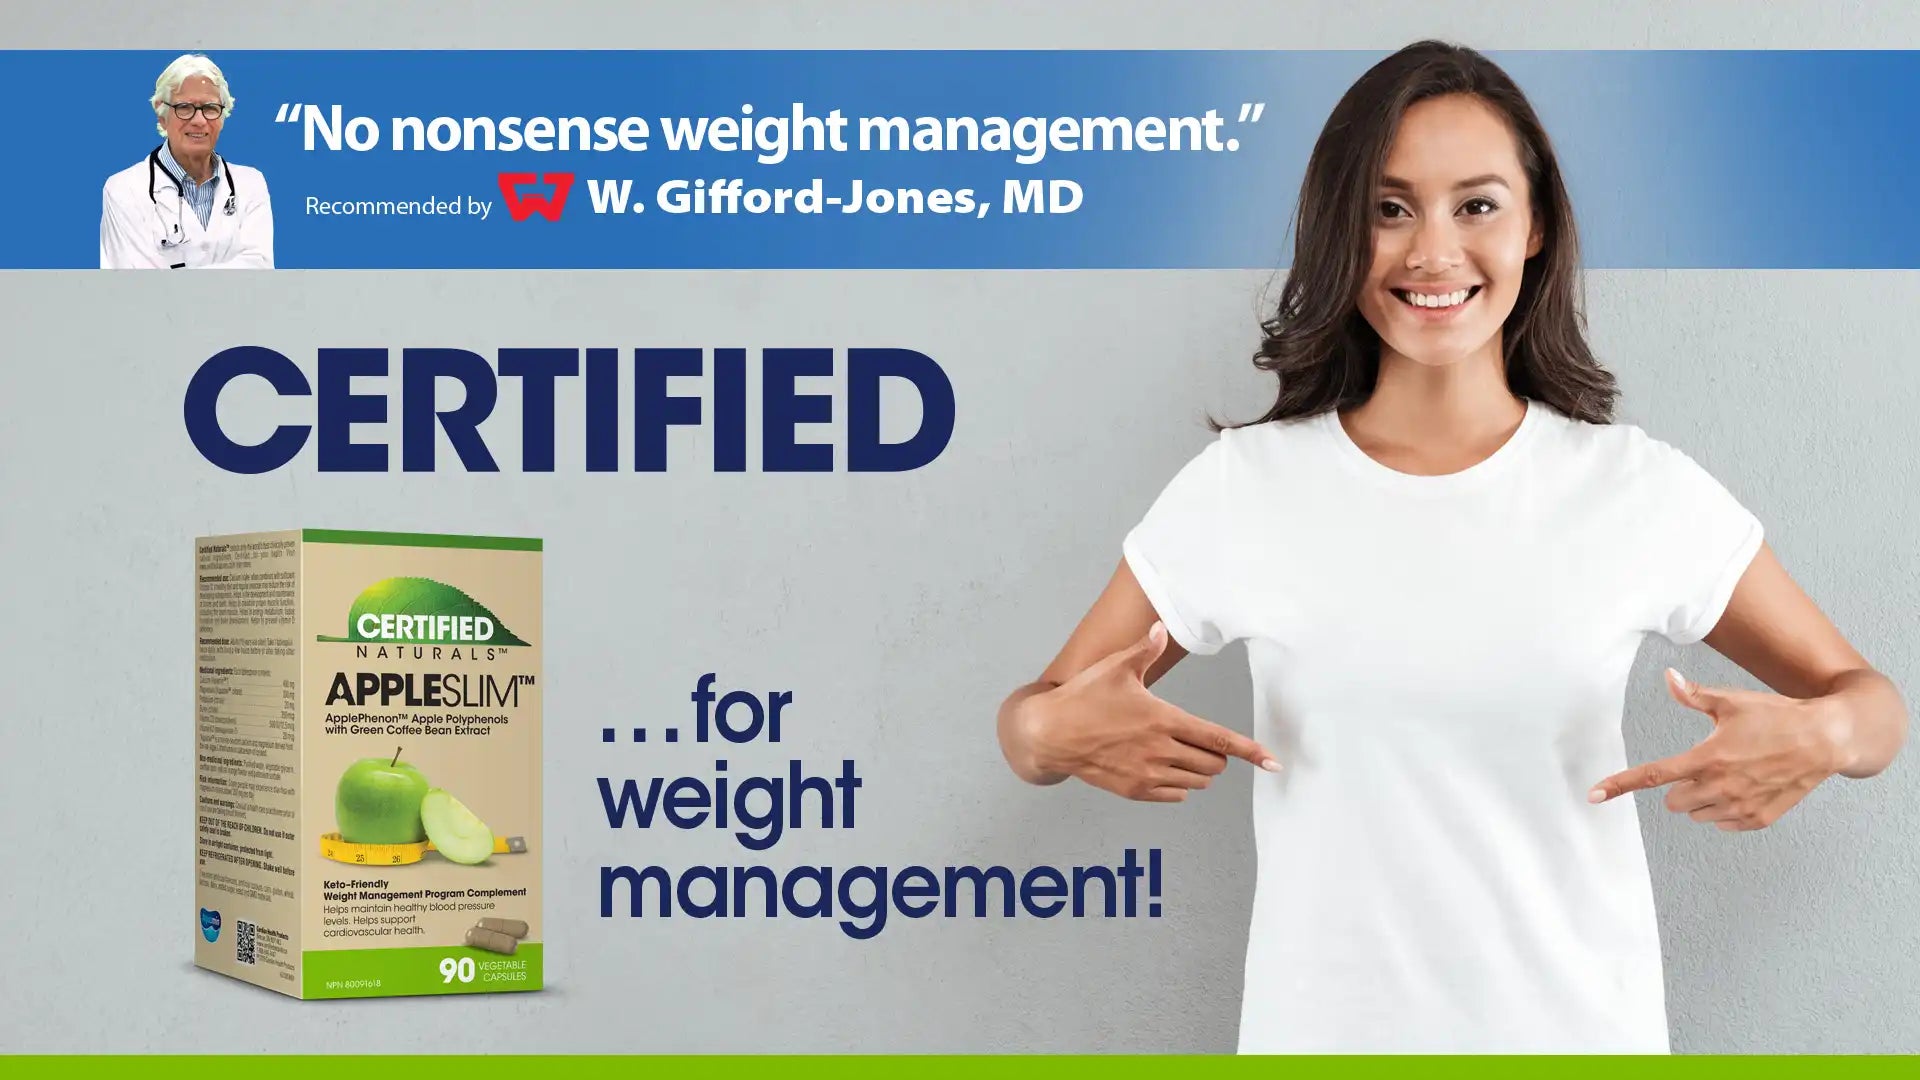 AppleSlim for weight management. Recommended by Dr Gifford-Jones